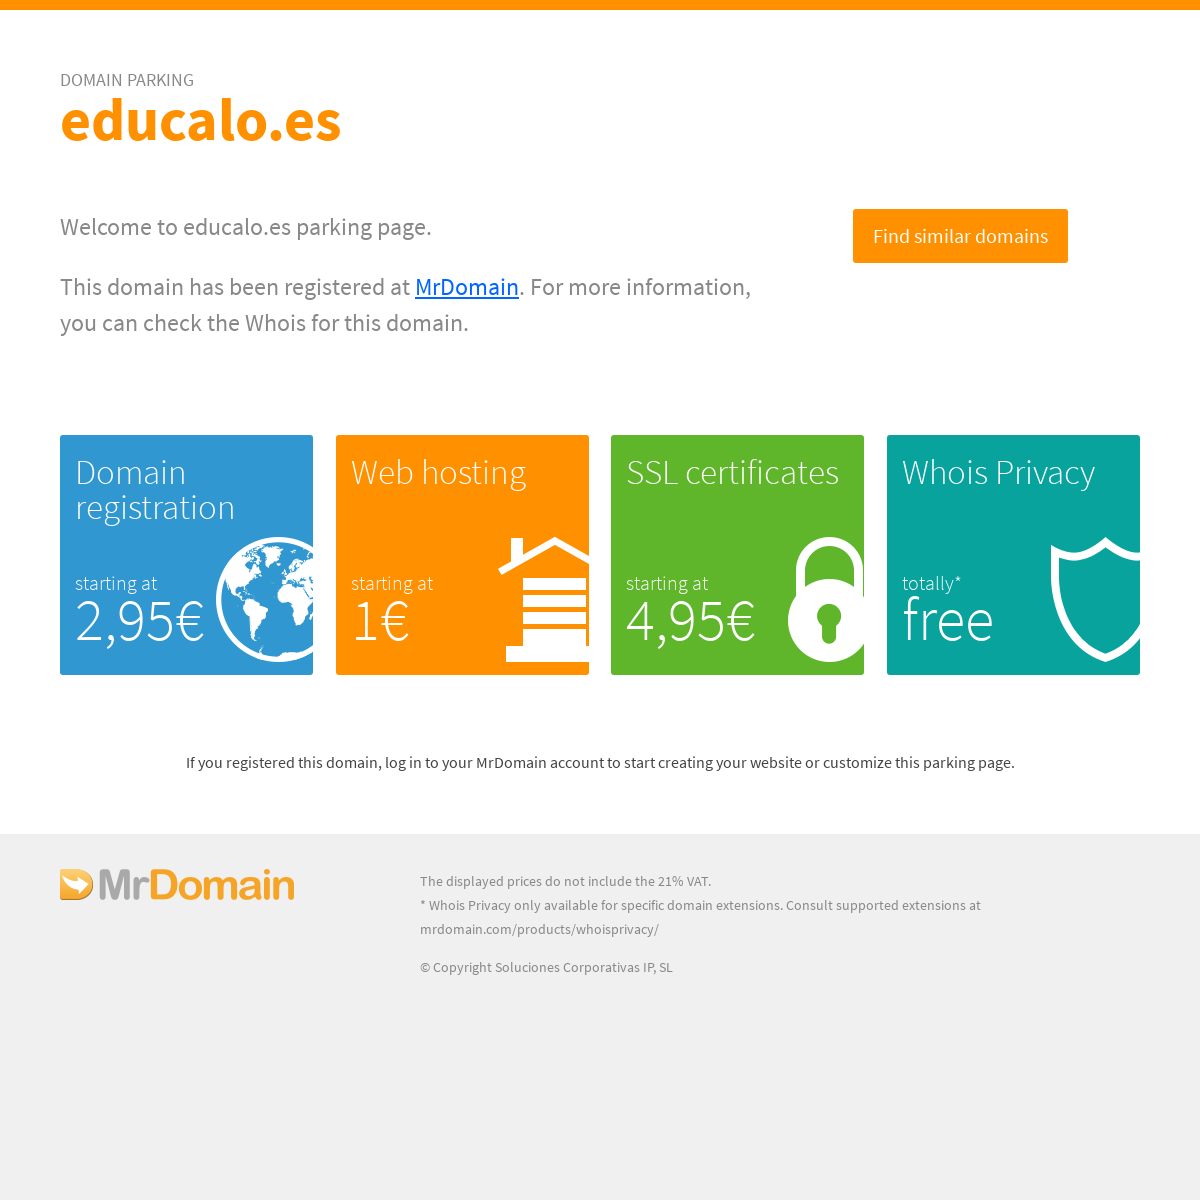 A complete backup of educalo.es